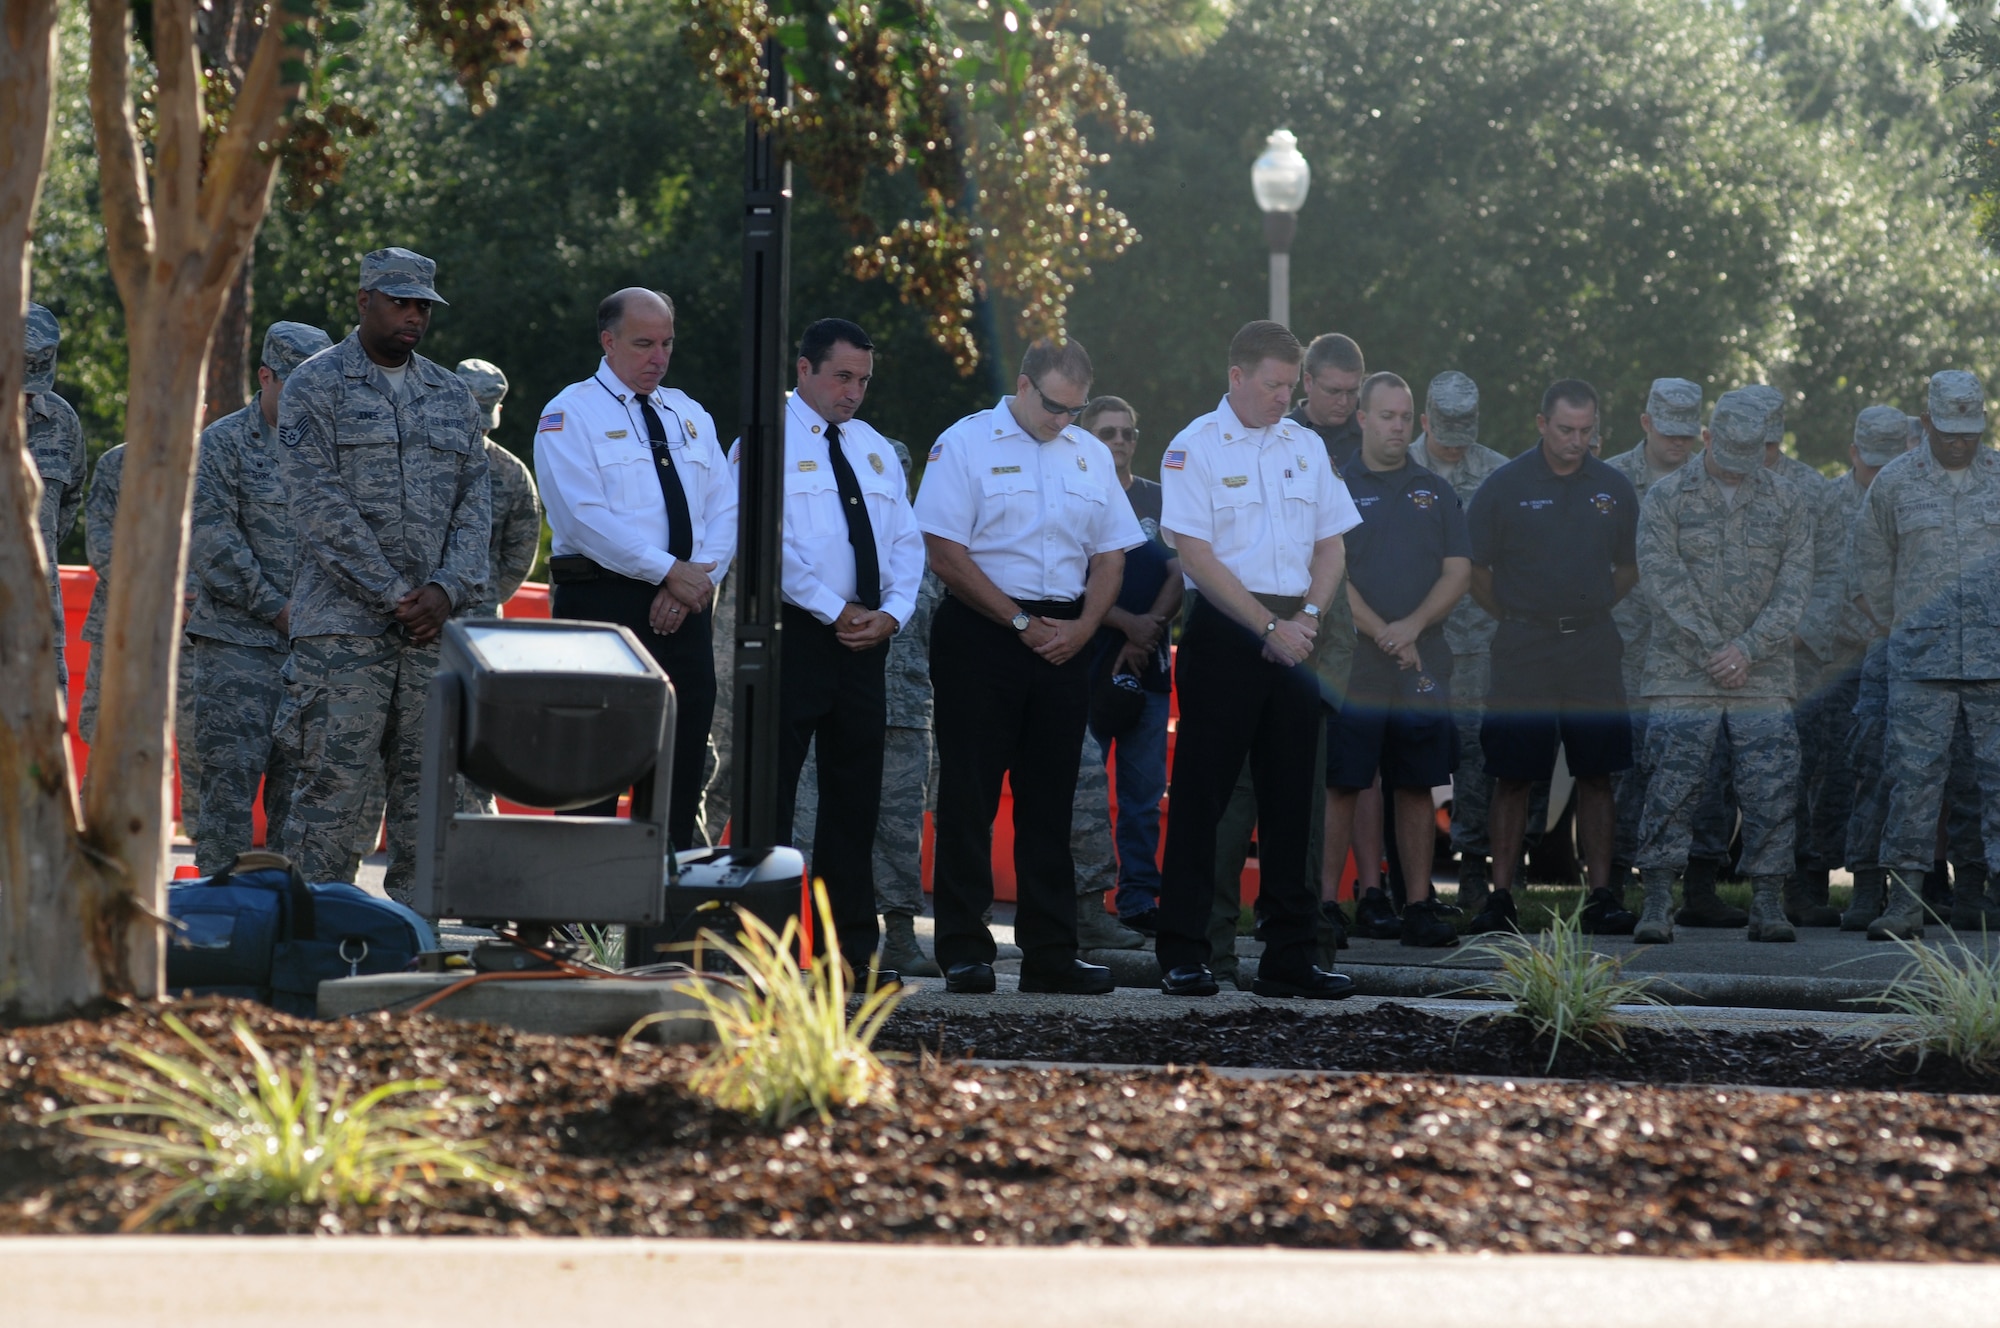 Firefighters from Biloxi, Miss., and Keesler Air Force Base, Miss., stand among Keesler personnel as they observe a moment of silence during a remembrance ceremony Sept. 11, 2014, Keesler Air Force Base, Miss. The ceremony honored those who lost their lives during the 9/11 attacks.  (U.S. Air Force photo by Kemberly Groue)